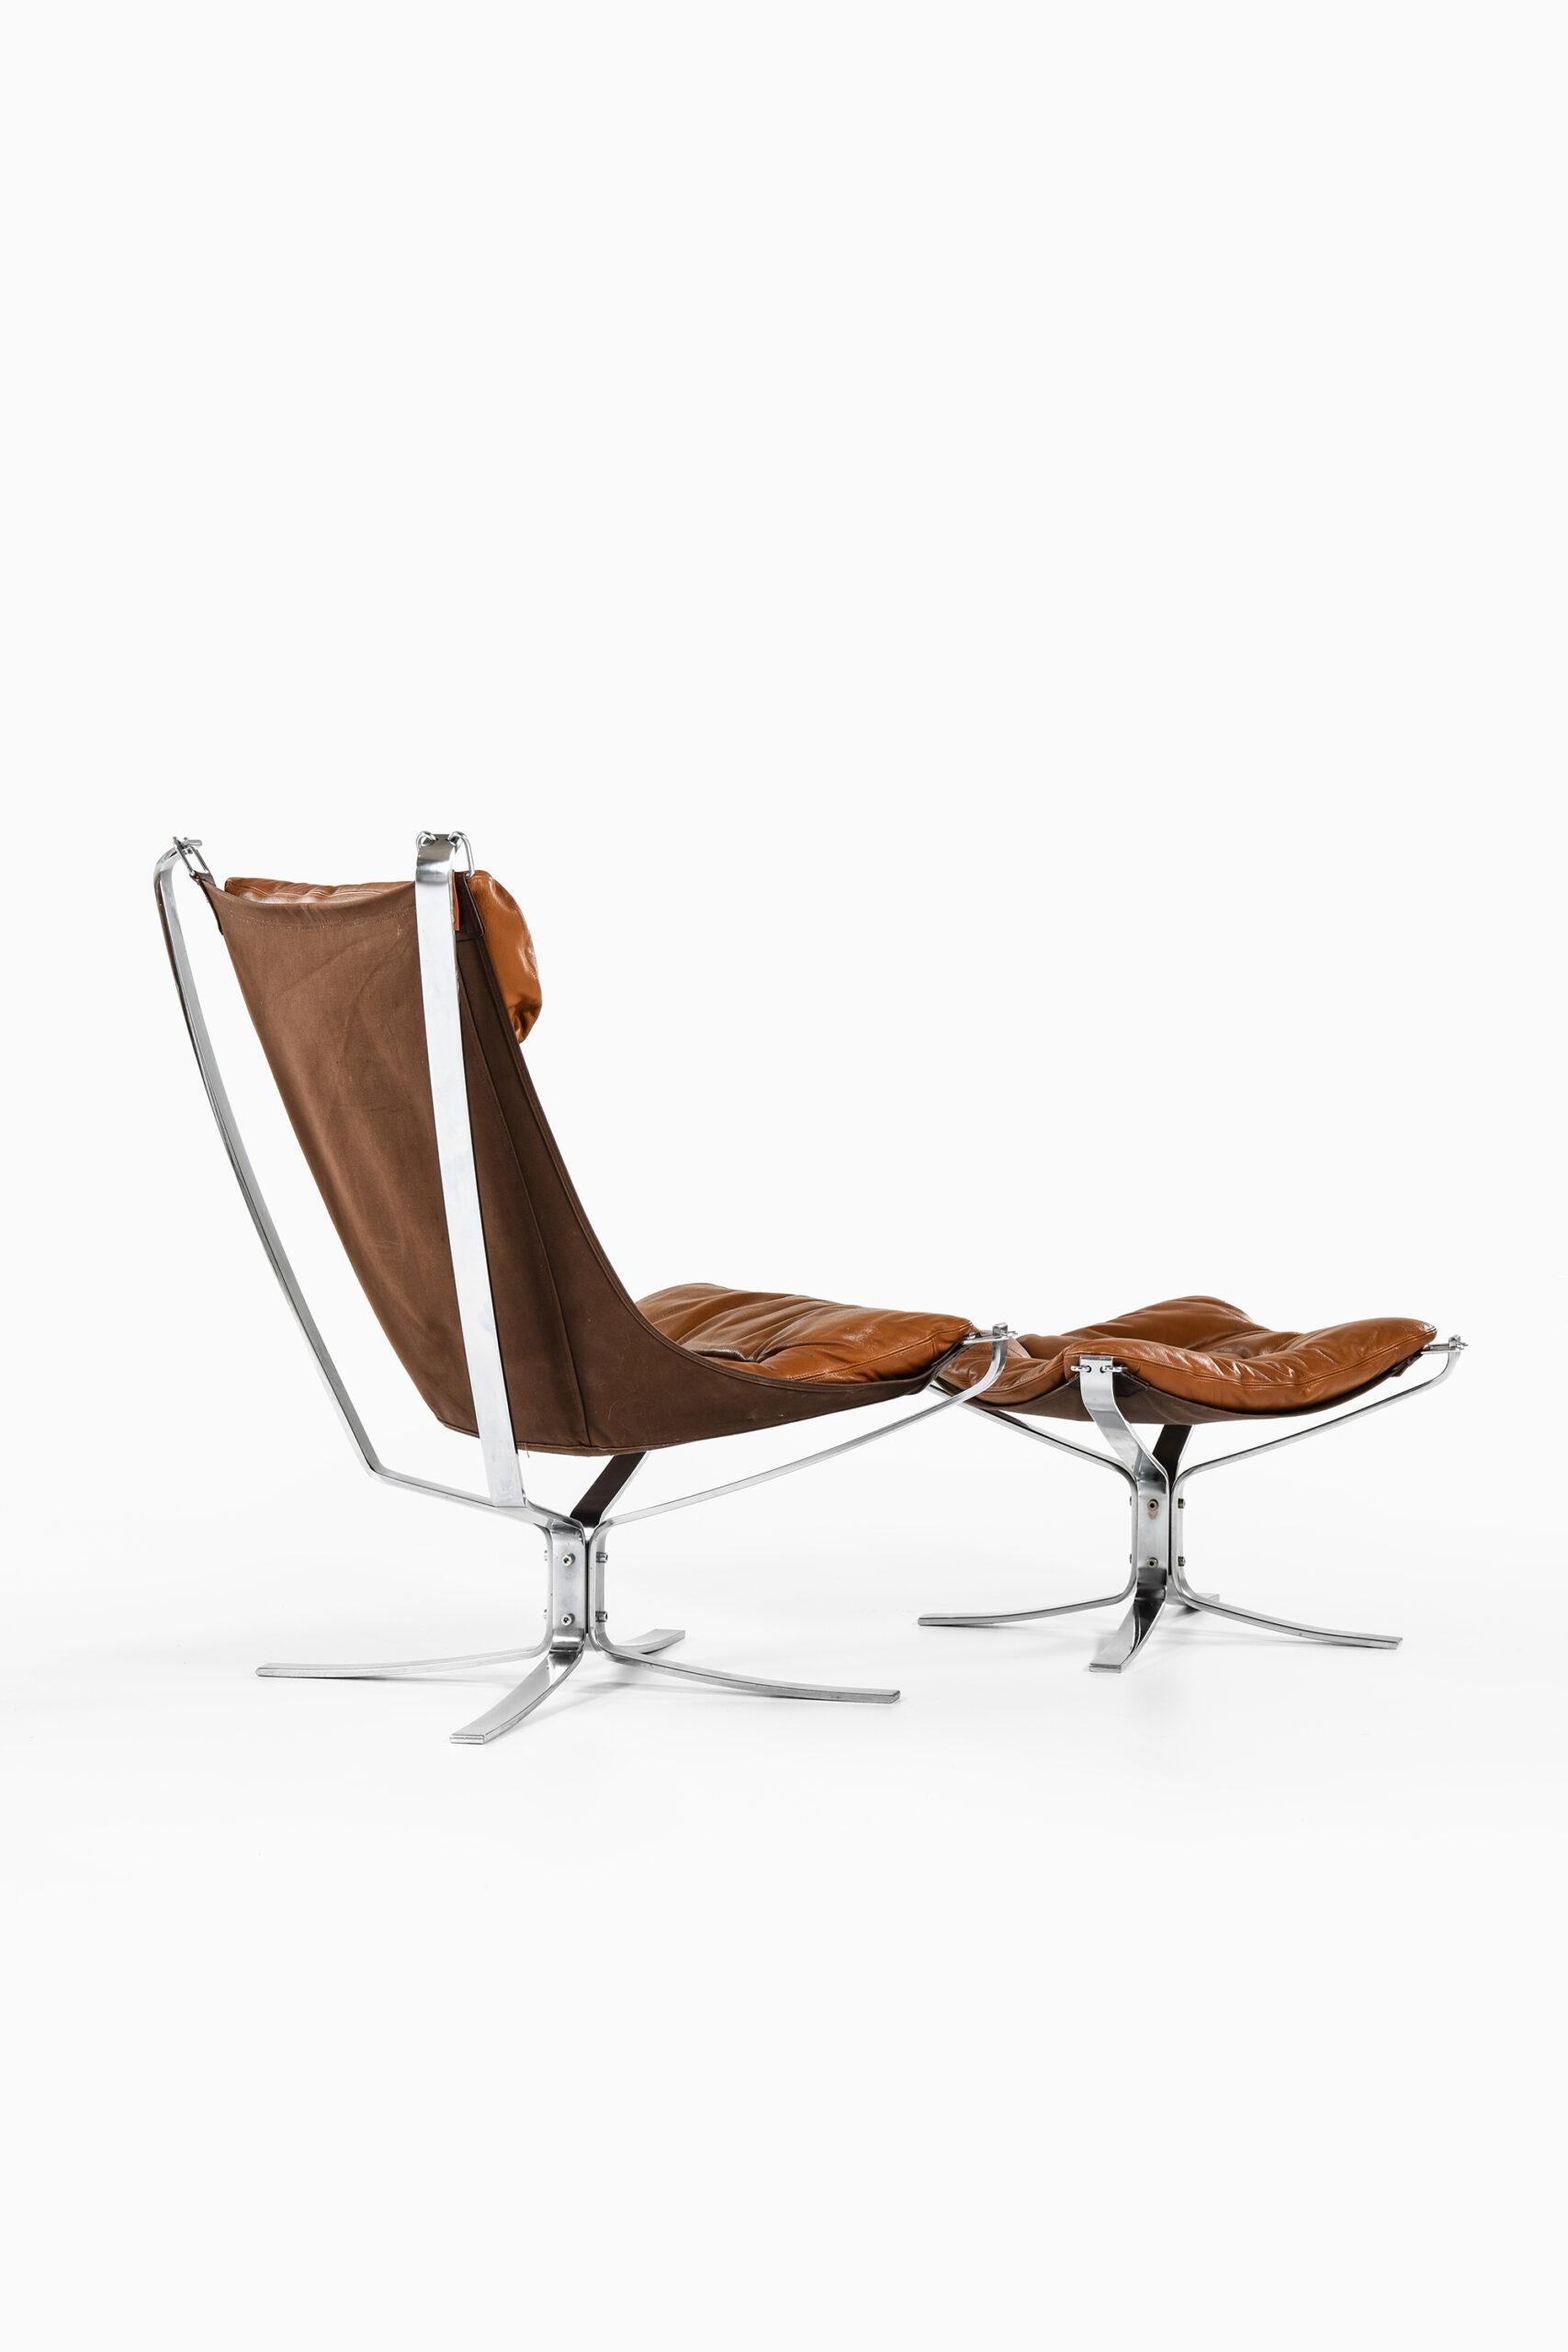 Sigurd Resell Seating Group Model Falcon Produced by Vatne Møbler in Norway For Sale 8